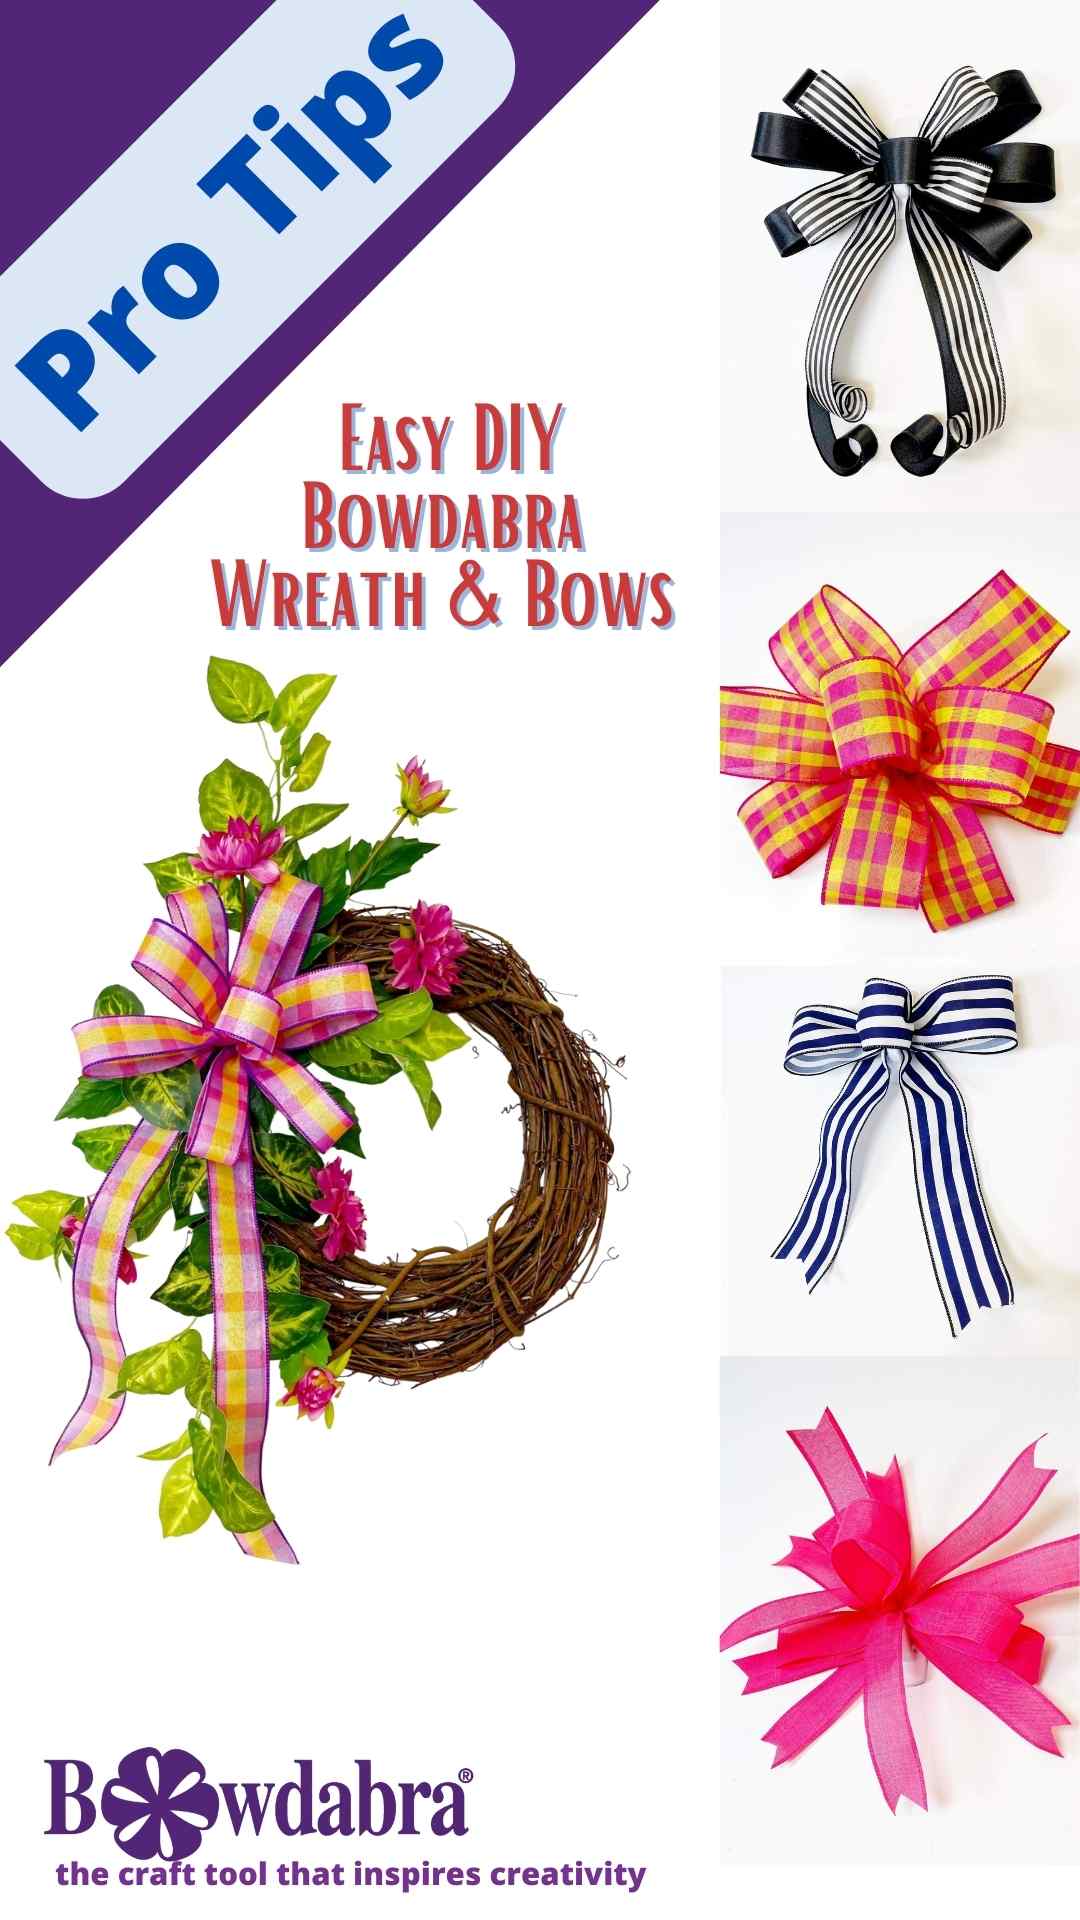 How to Make a Bow - 3 Ways to Make a Bow for a Wreath or Gift